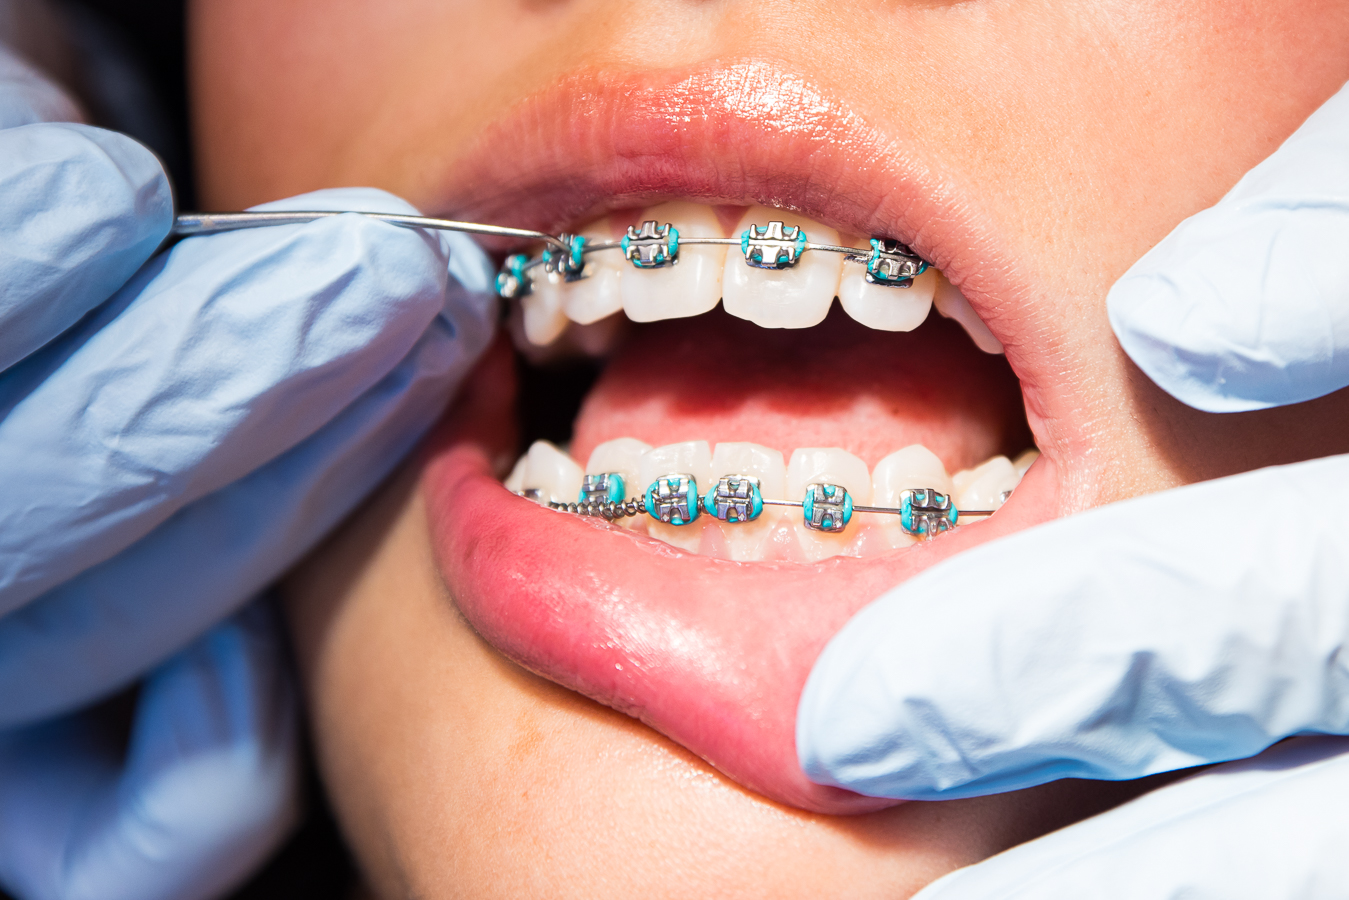 close up image of a patients teeth as the dental assistant works on tightening the teal colored braces during this branding photography session 